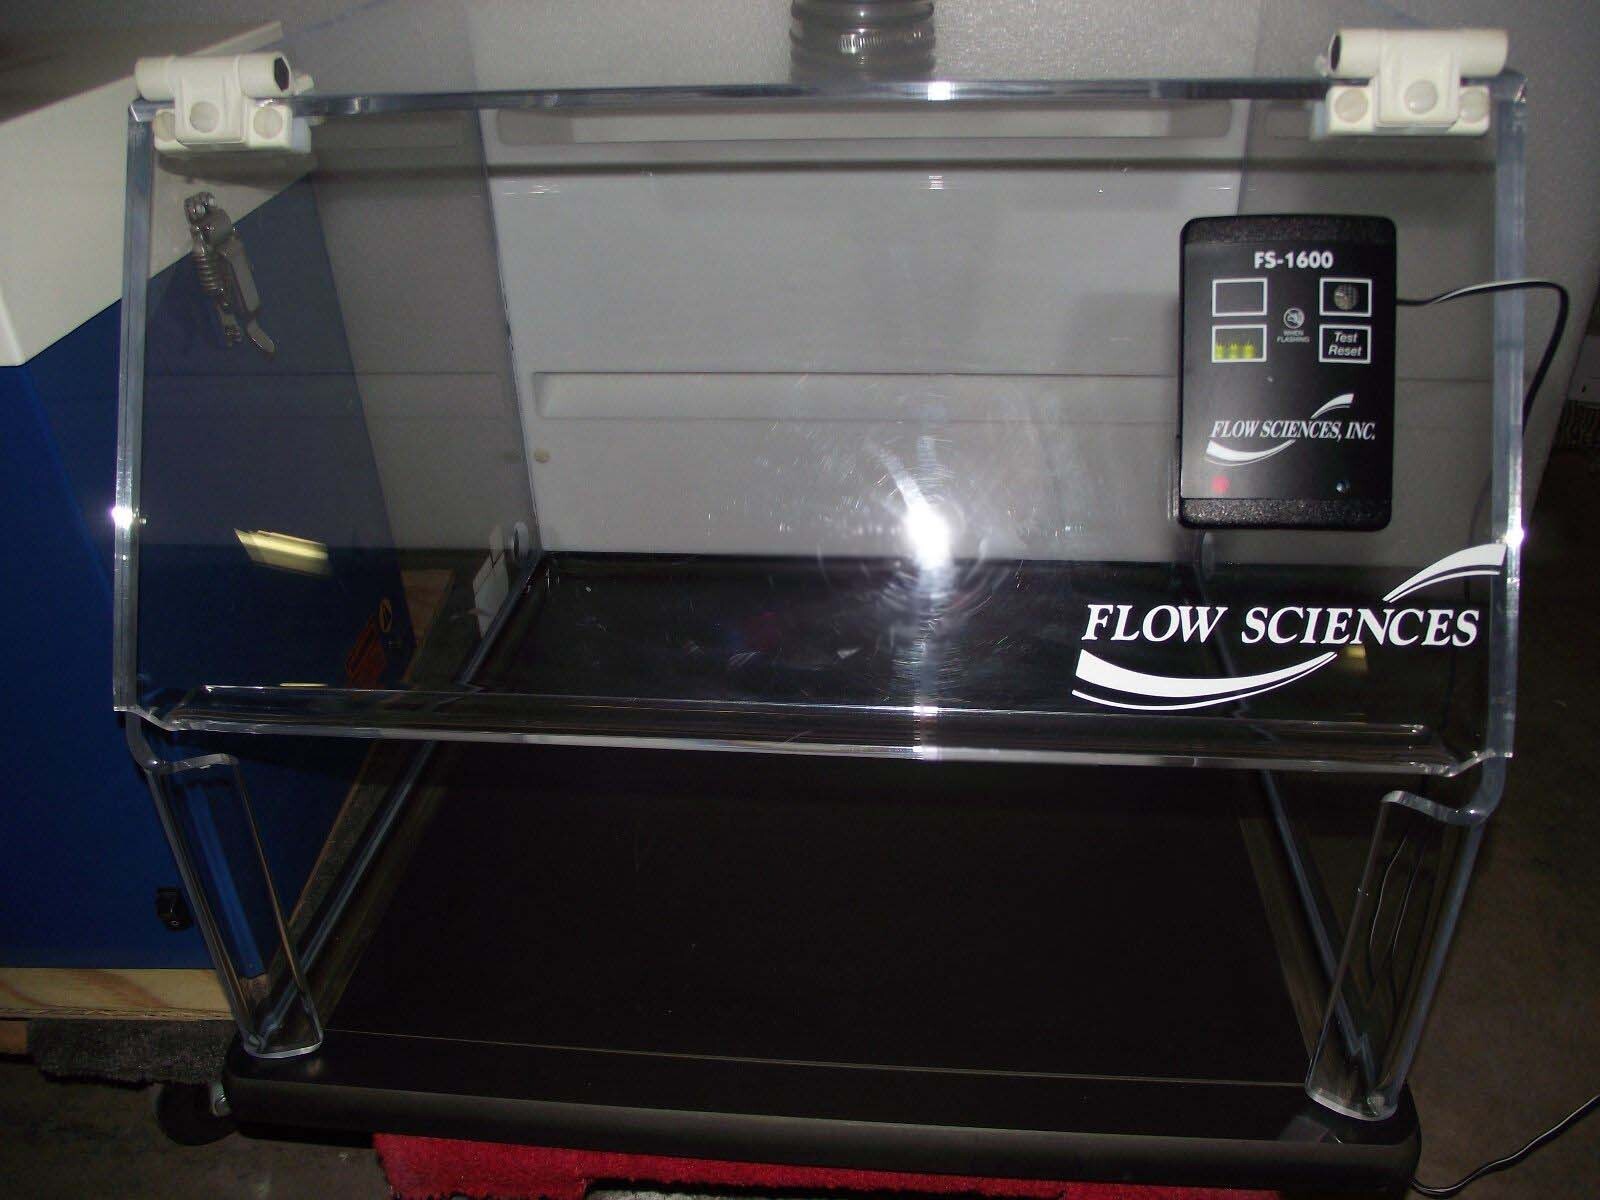 Photo Used FLOW SCIENCES 2-VBSE For Sale